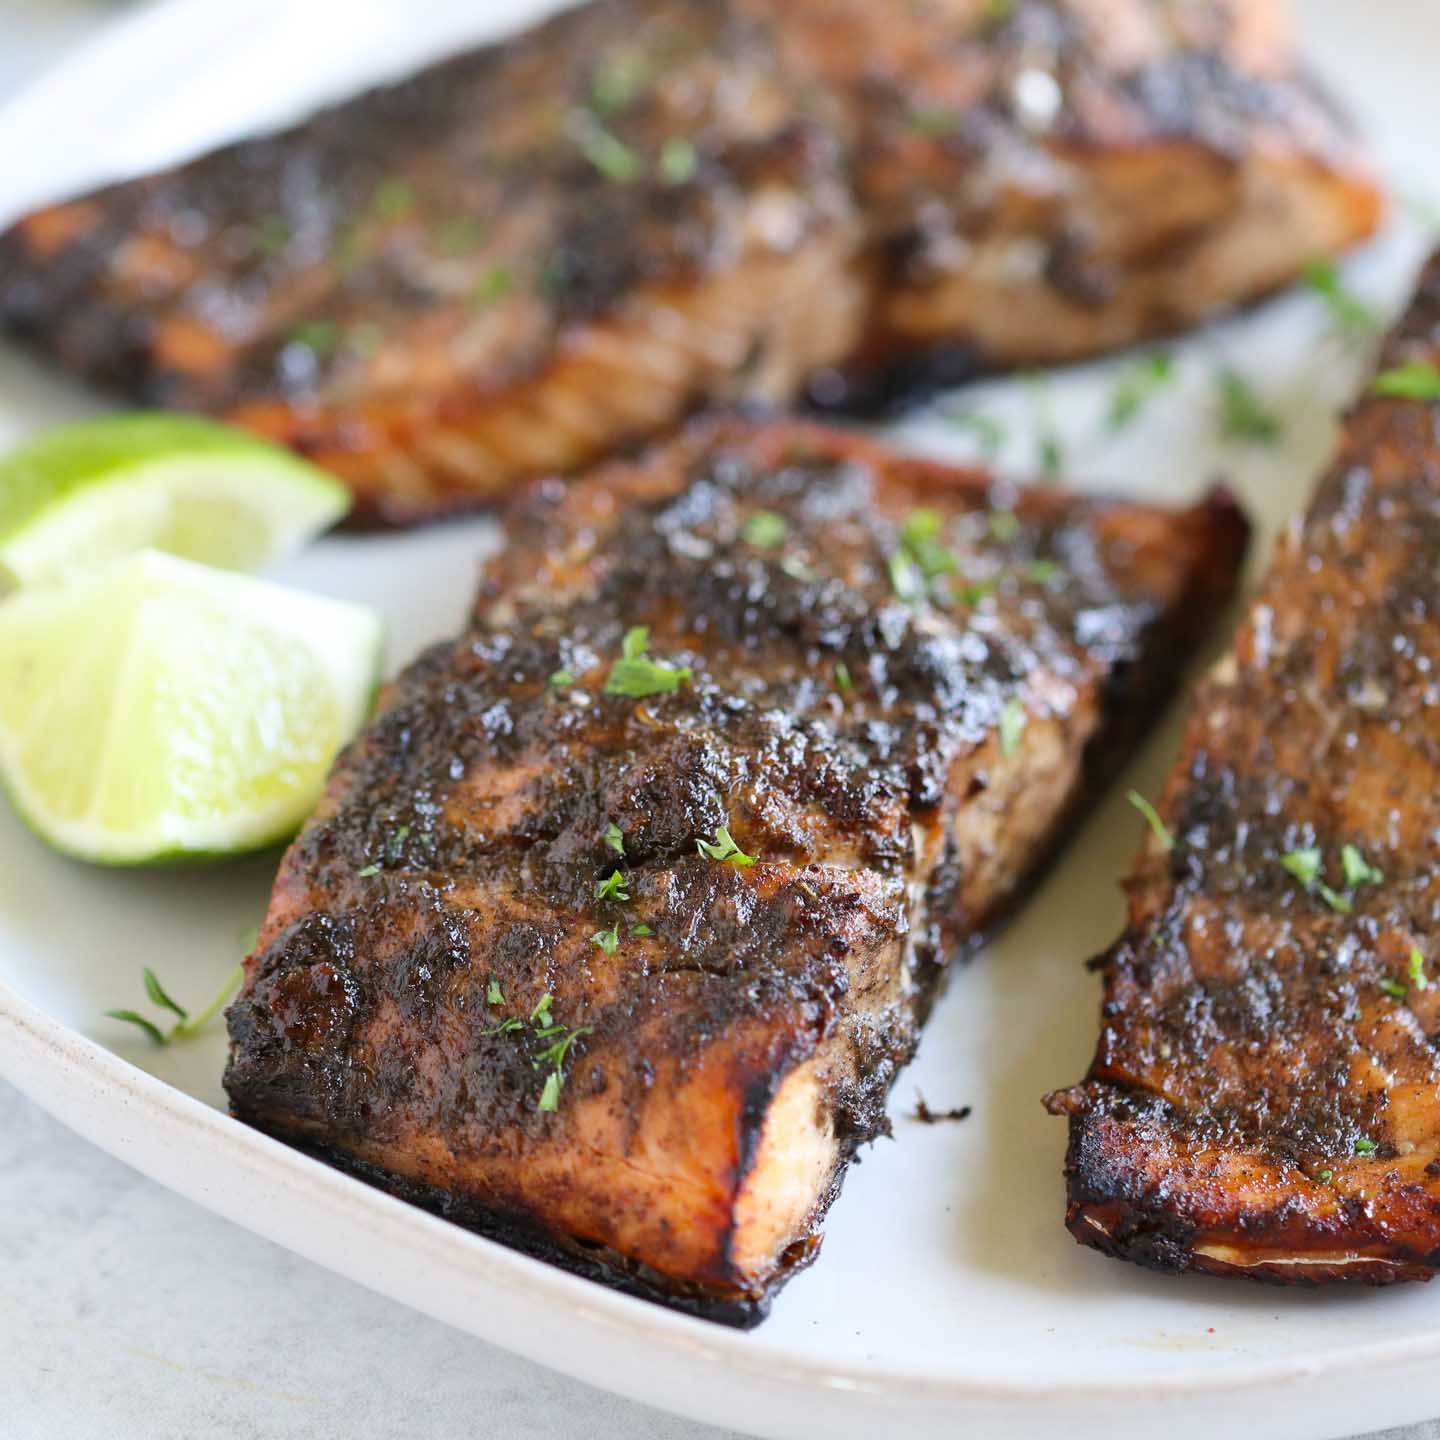 A plate of jerk salmon with a golden-brown crust